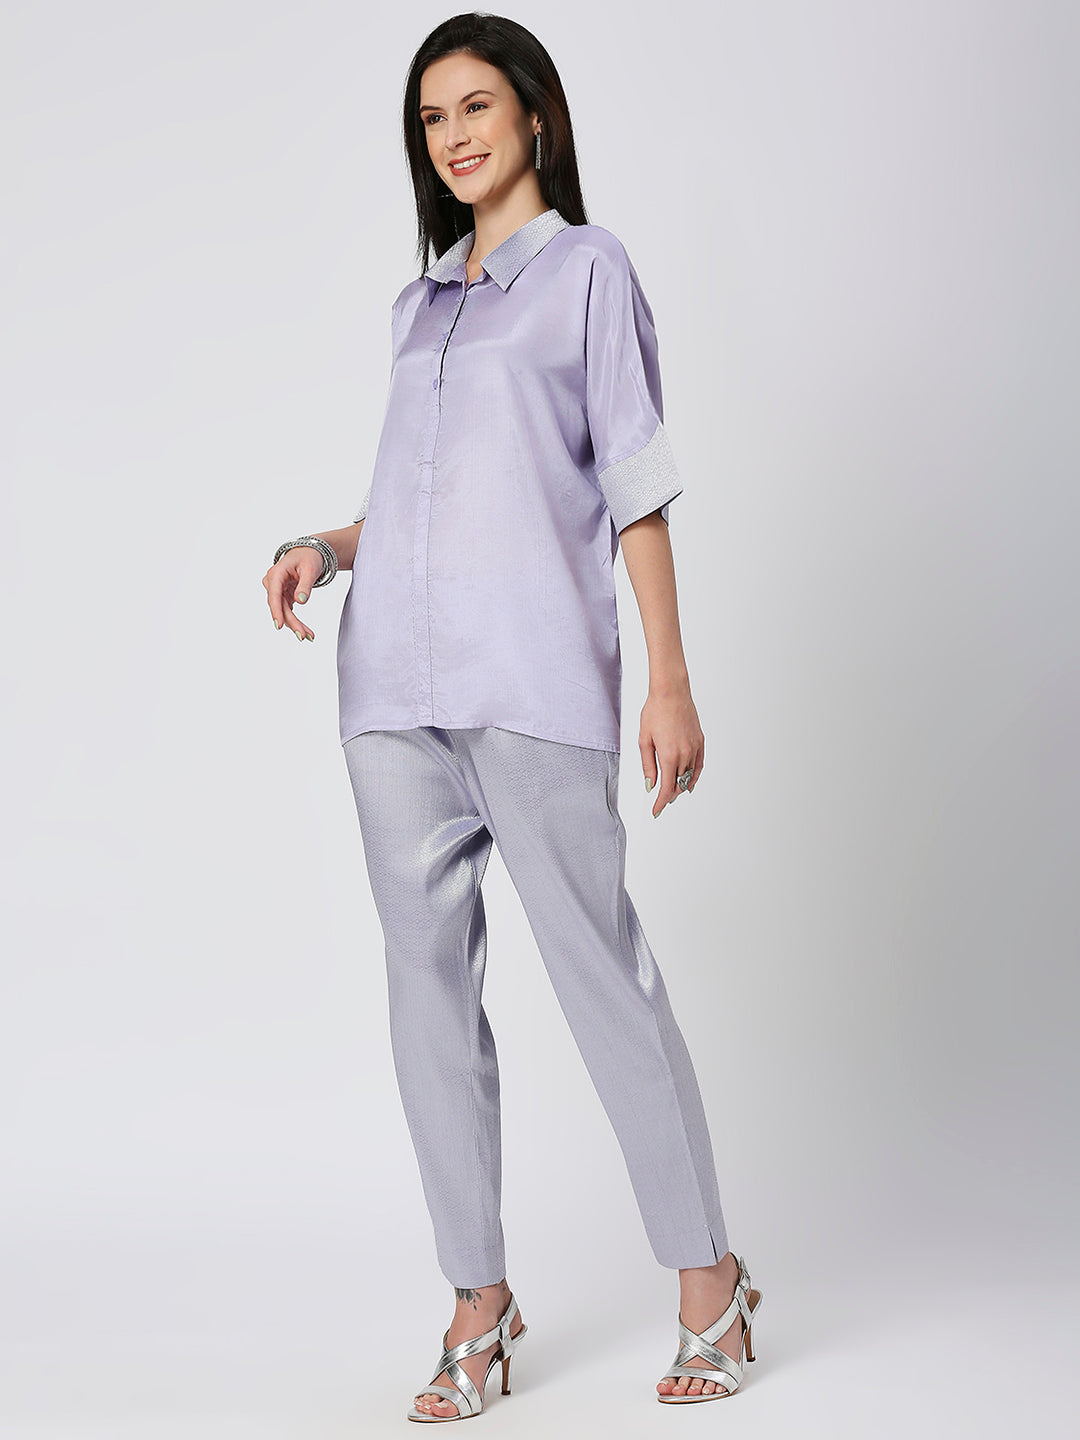 Lavender Solid Viscose Top with Brocade Trims & Pant